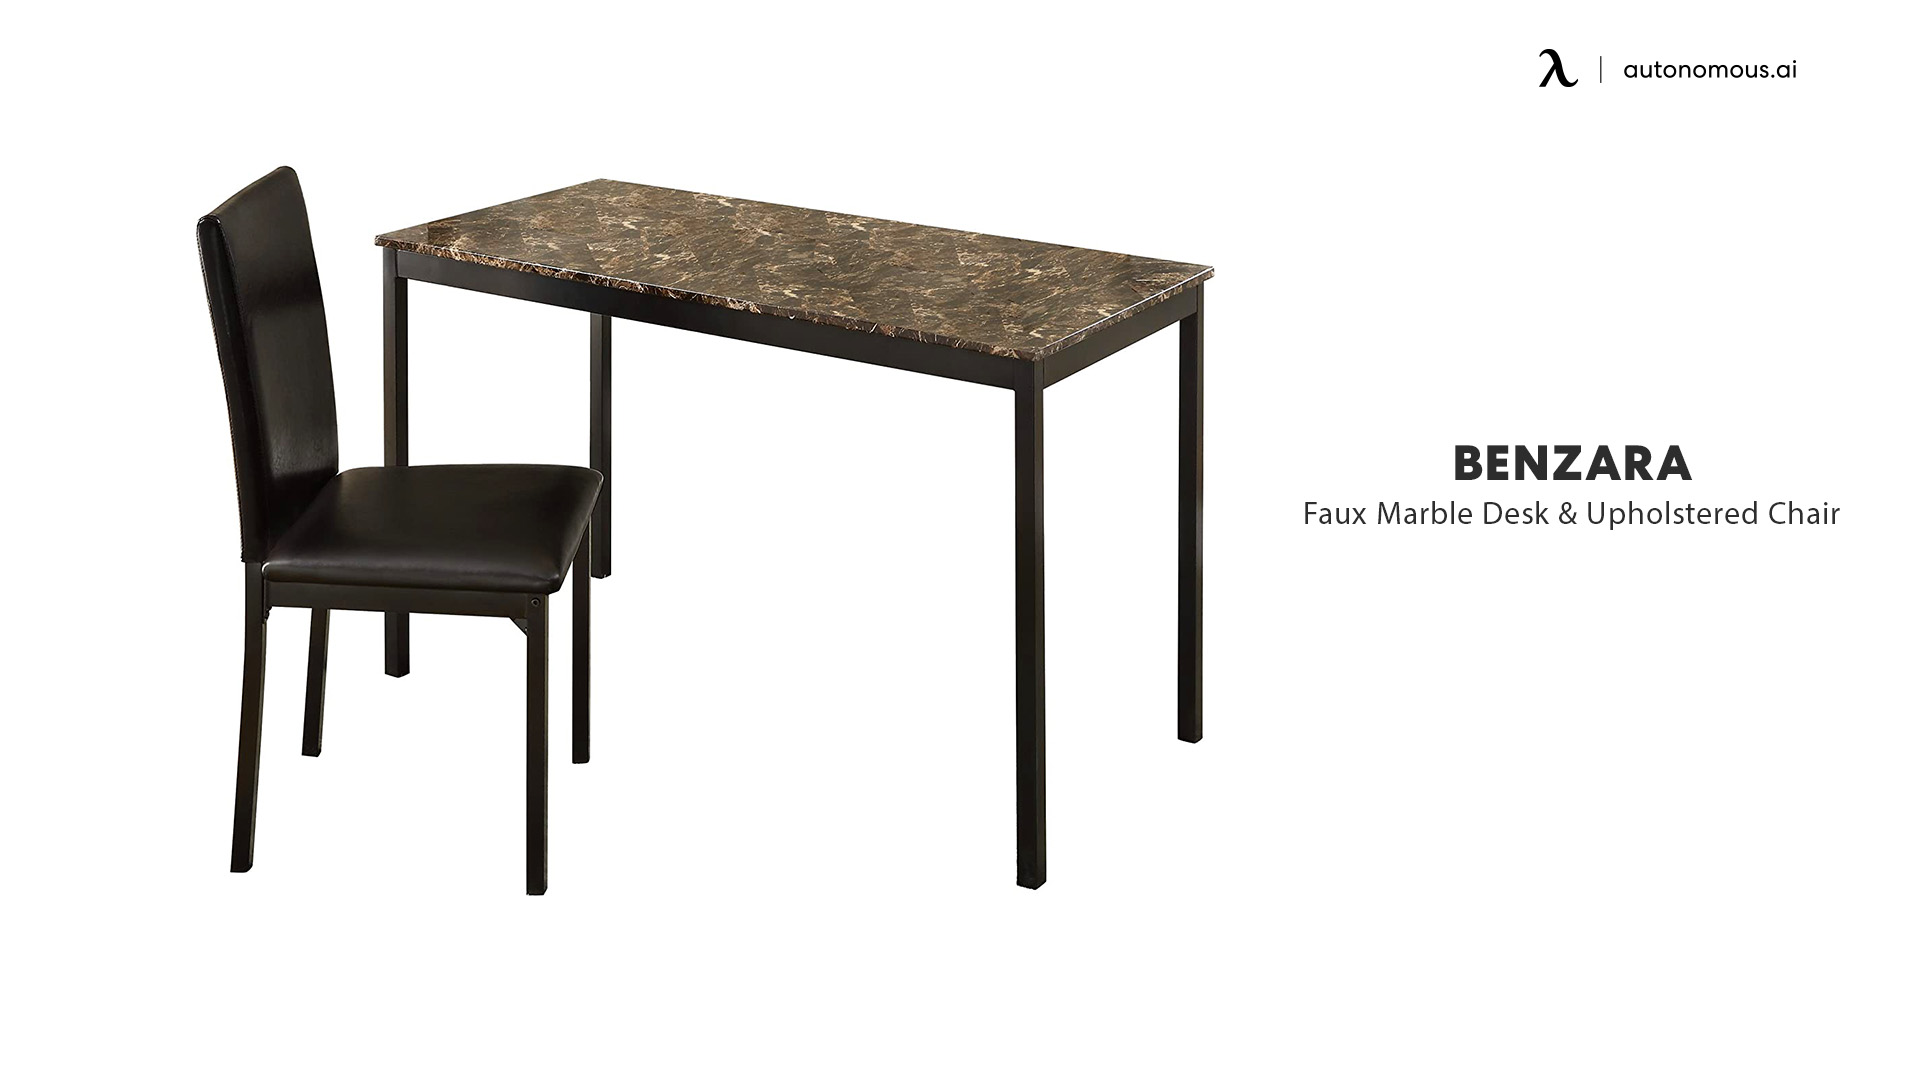 Benzara BM179946 Faux Marble Desk with Upholstered Chair